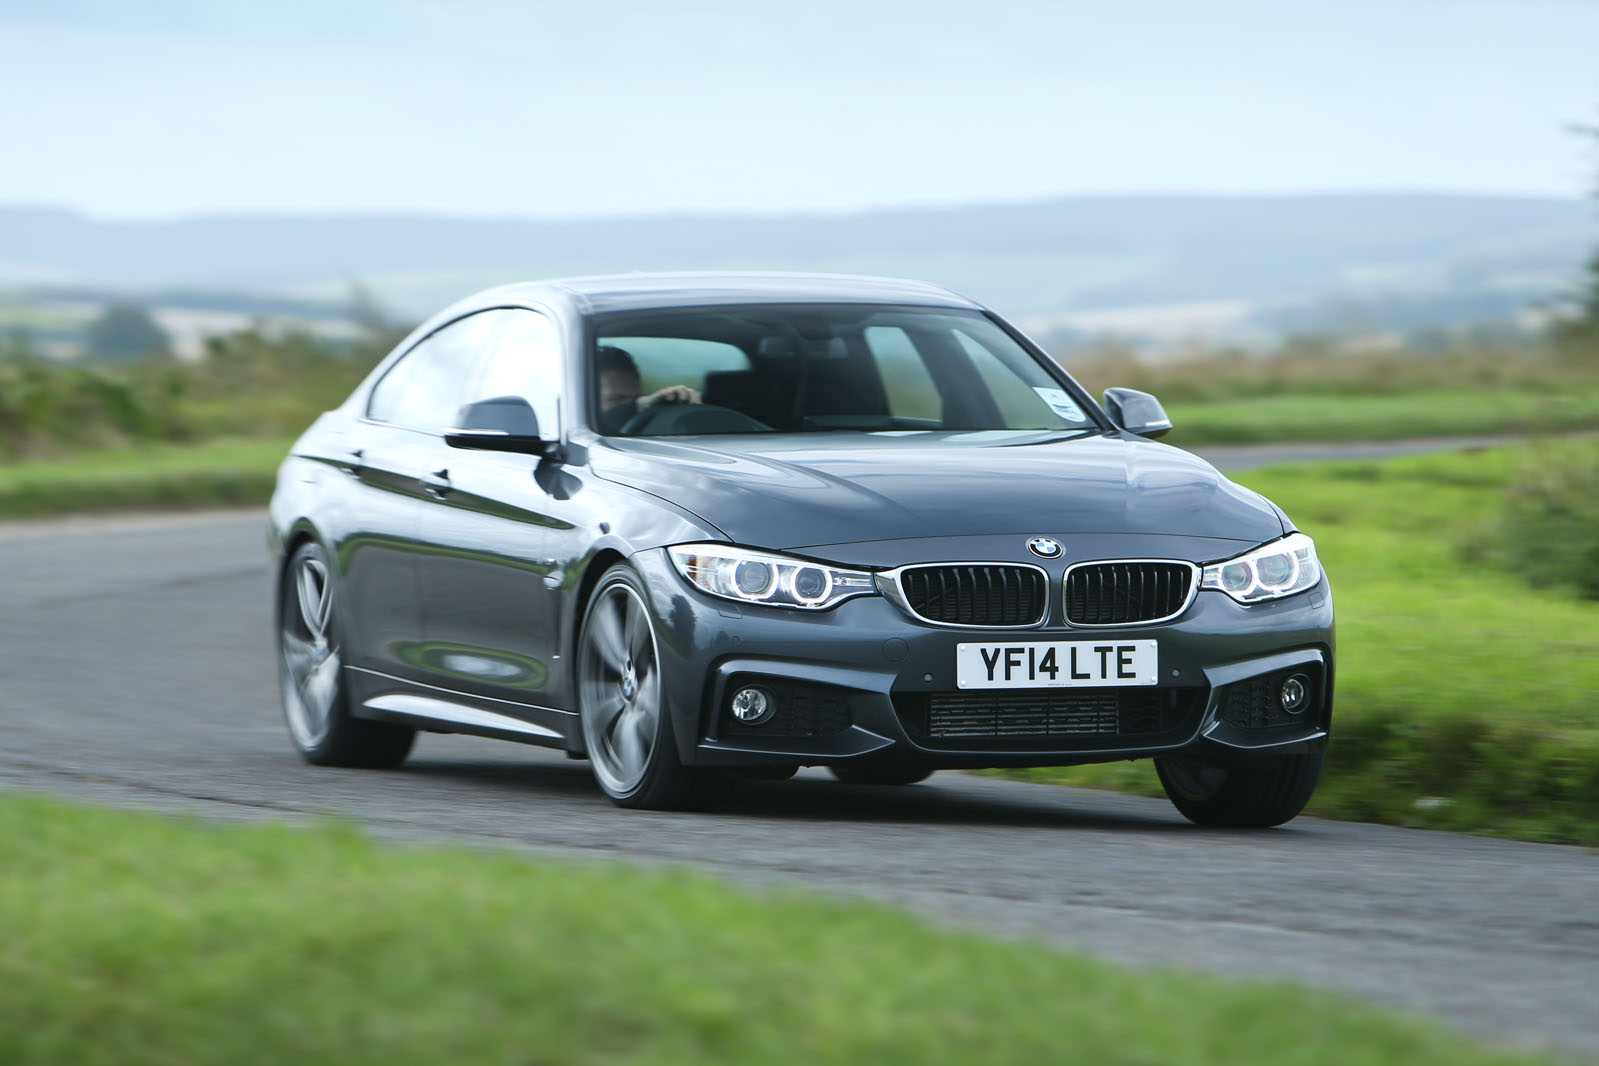 Nearly new buying guide: BMW 4 Series Gran Coupe | Autocar